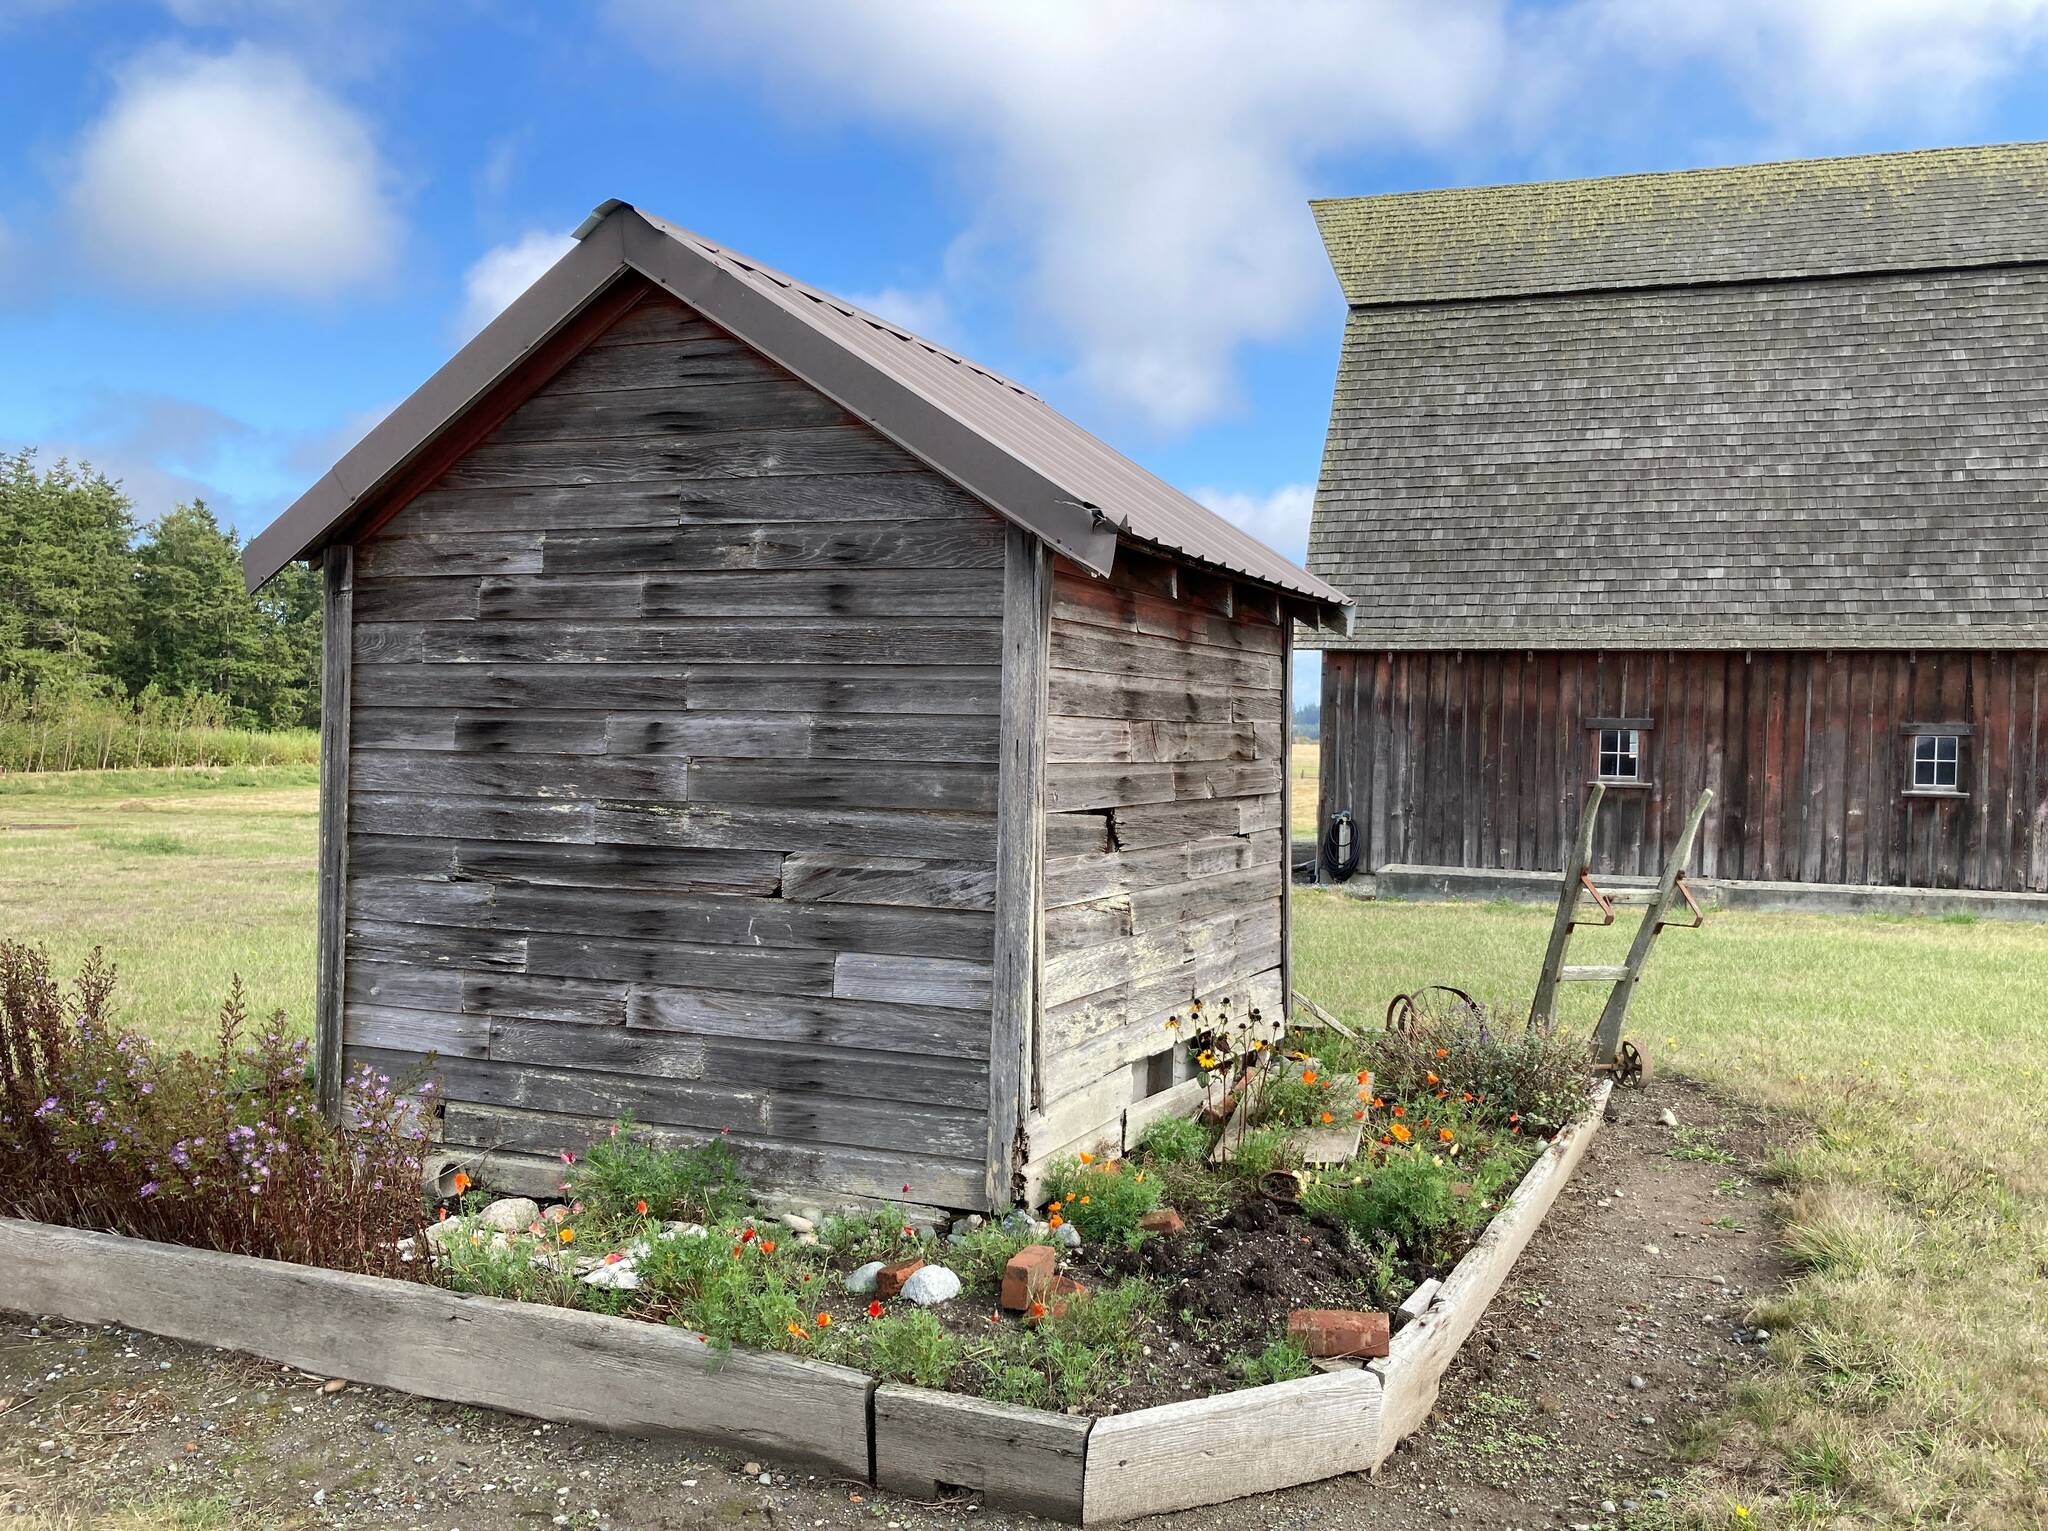 Photos by the Trust Board of Ebey’s Landing National Historical Reserve
The Comstock Well House is one of 11 historical buildings that received funds for preservation work from the Ebey’s Forever Grant program this year.